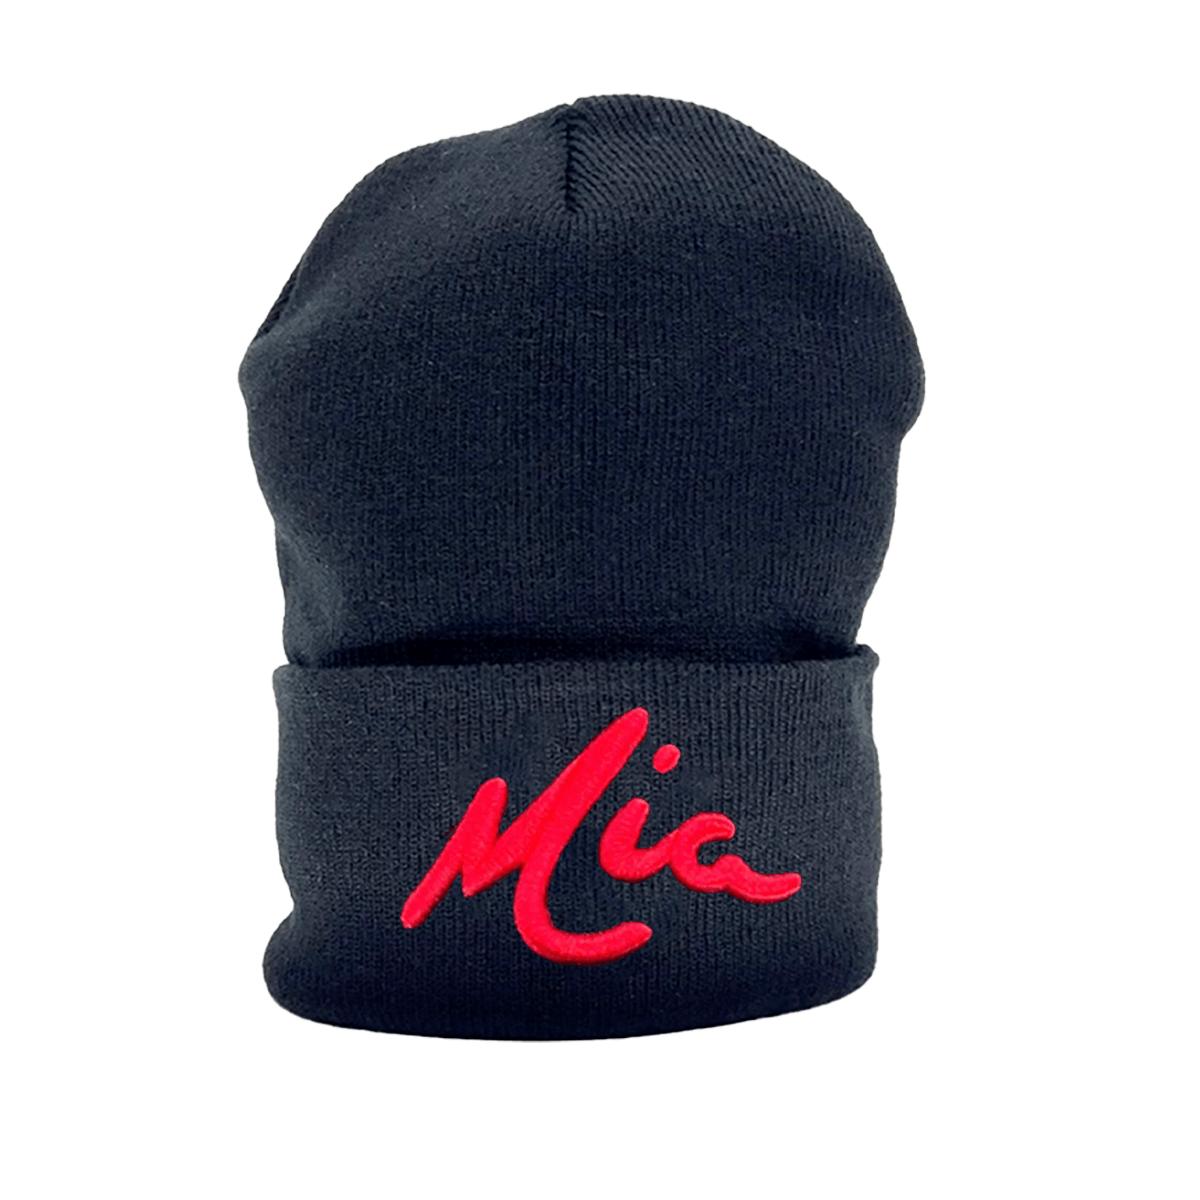 - THE OVERTIME BEANIE -